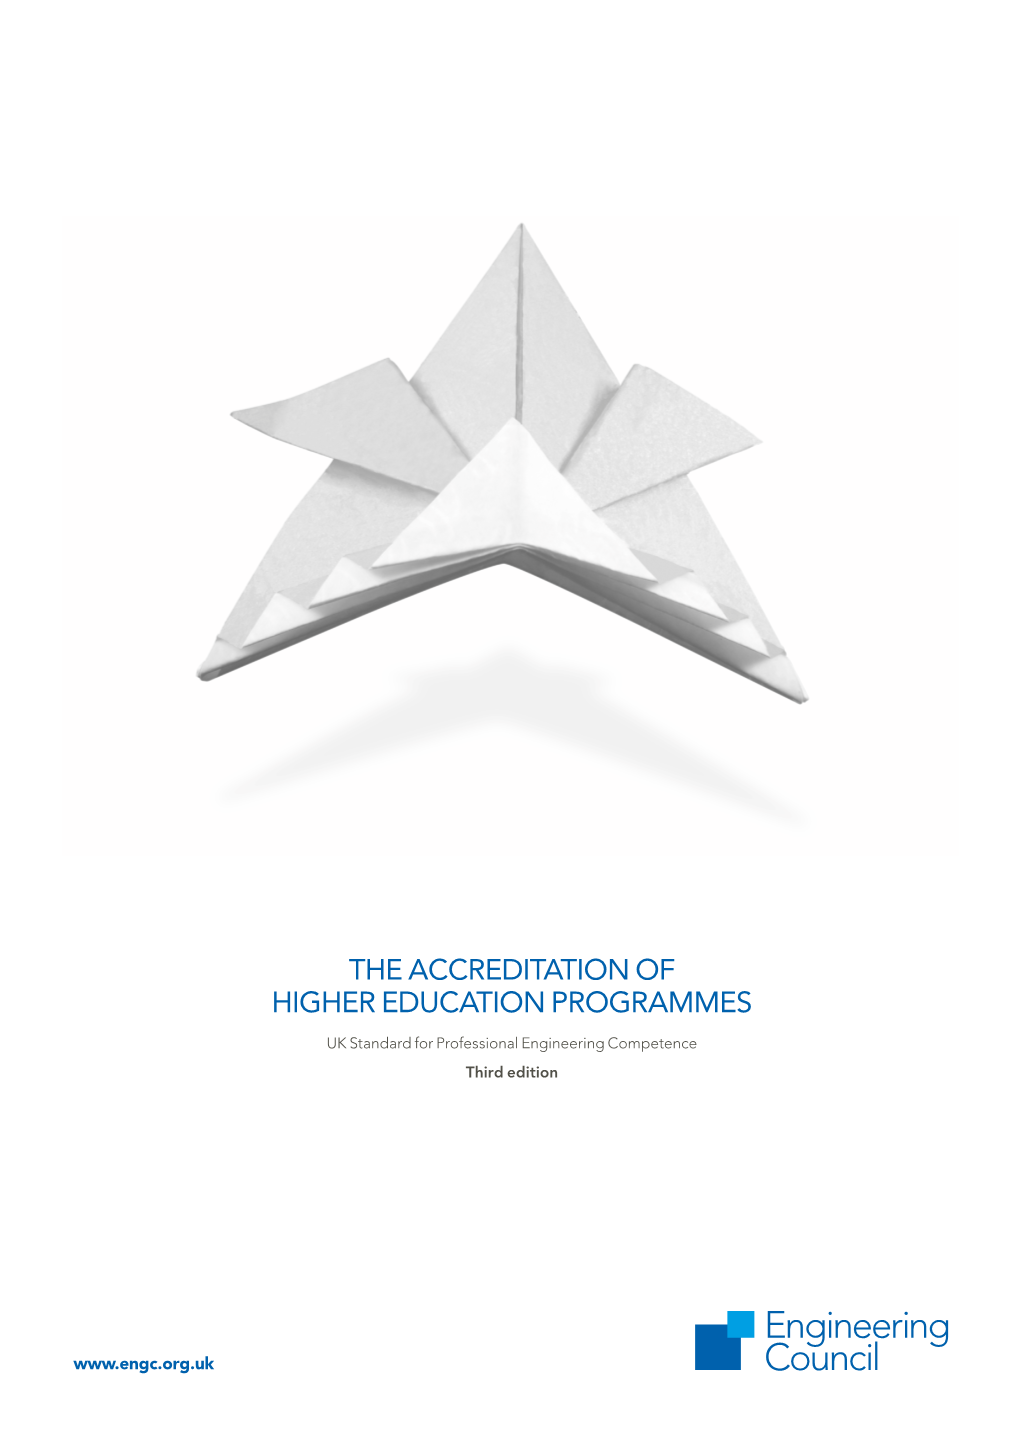 The Accreditation of Higher Education Programmes